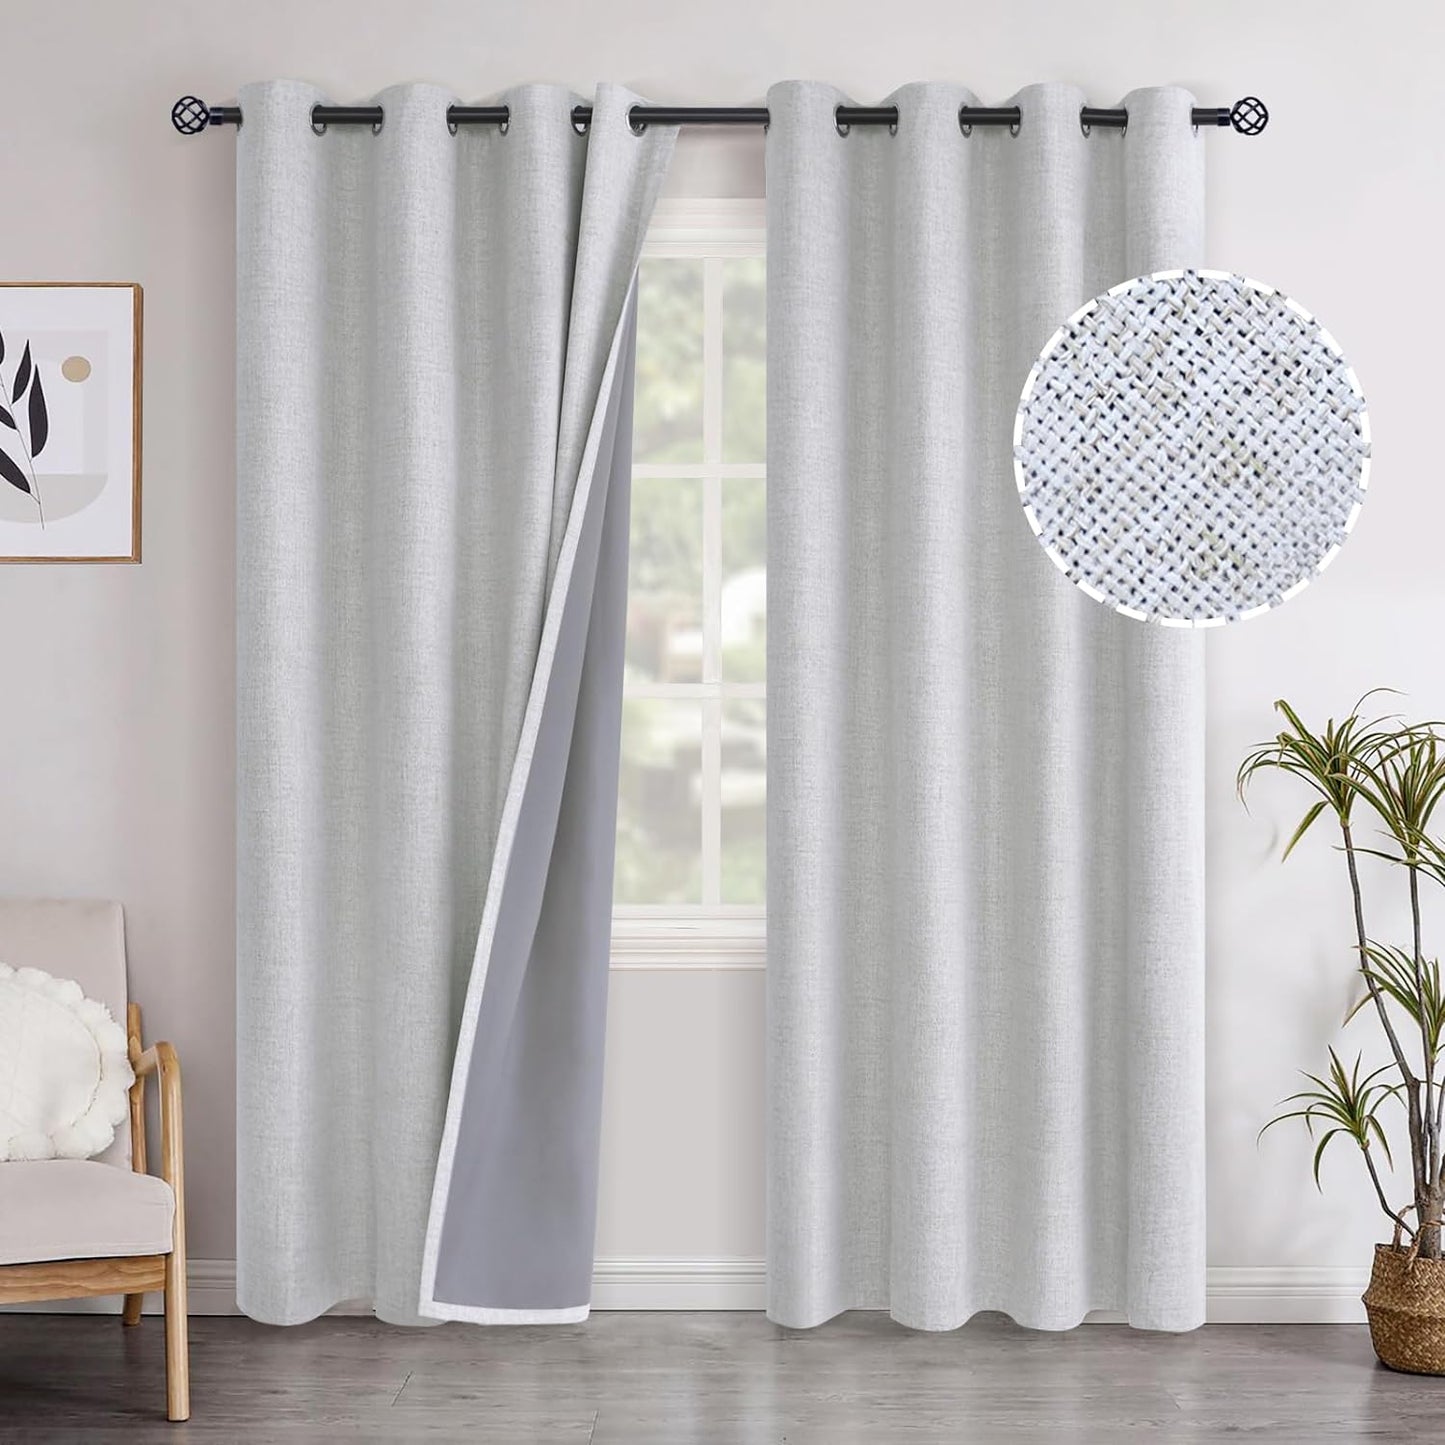 Youngstex Linen Blackout Curtains 63 Inch Length, Grommet Darkening Bedroom Curtains Burlap Linen Window Drapes Thermal Insulated for Basement Summer Heat, 2 Panels, 52 X 63 Inch, Beige  YoungsTex Linen 52W X 95L 